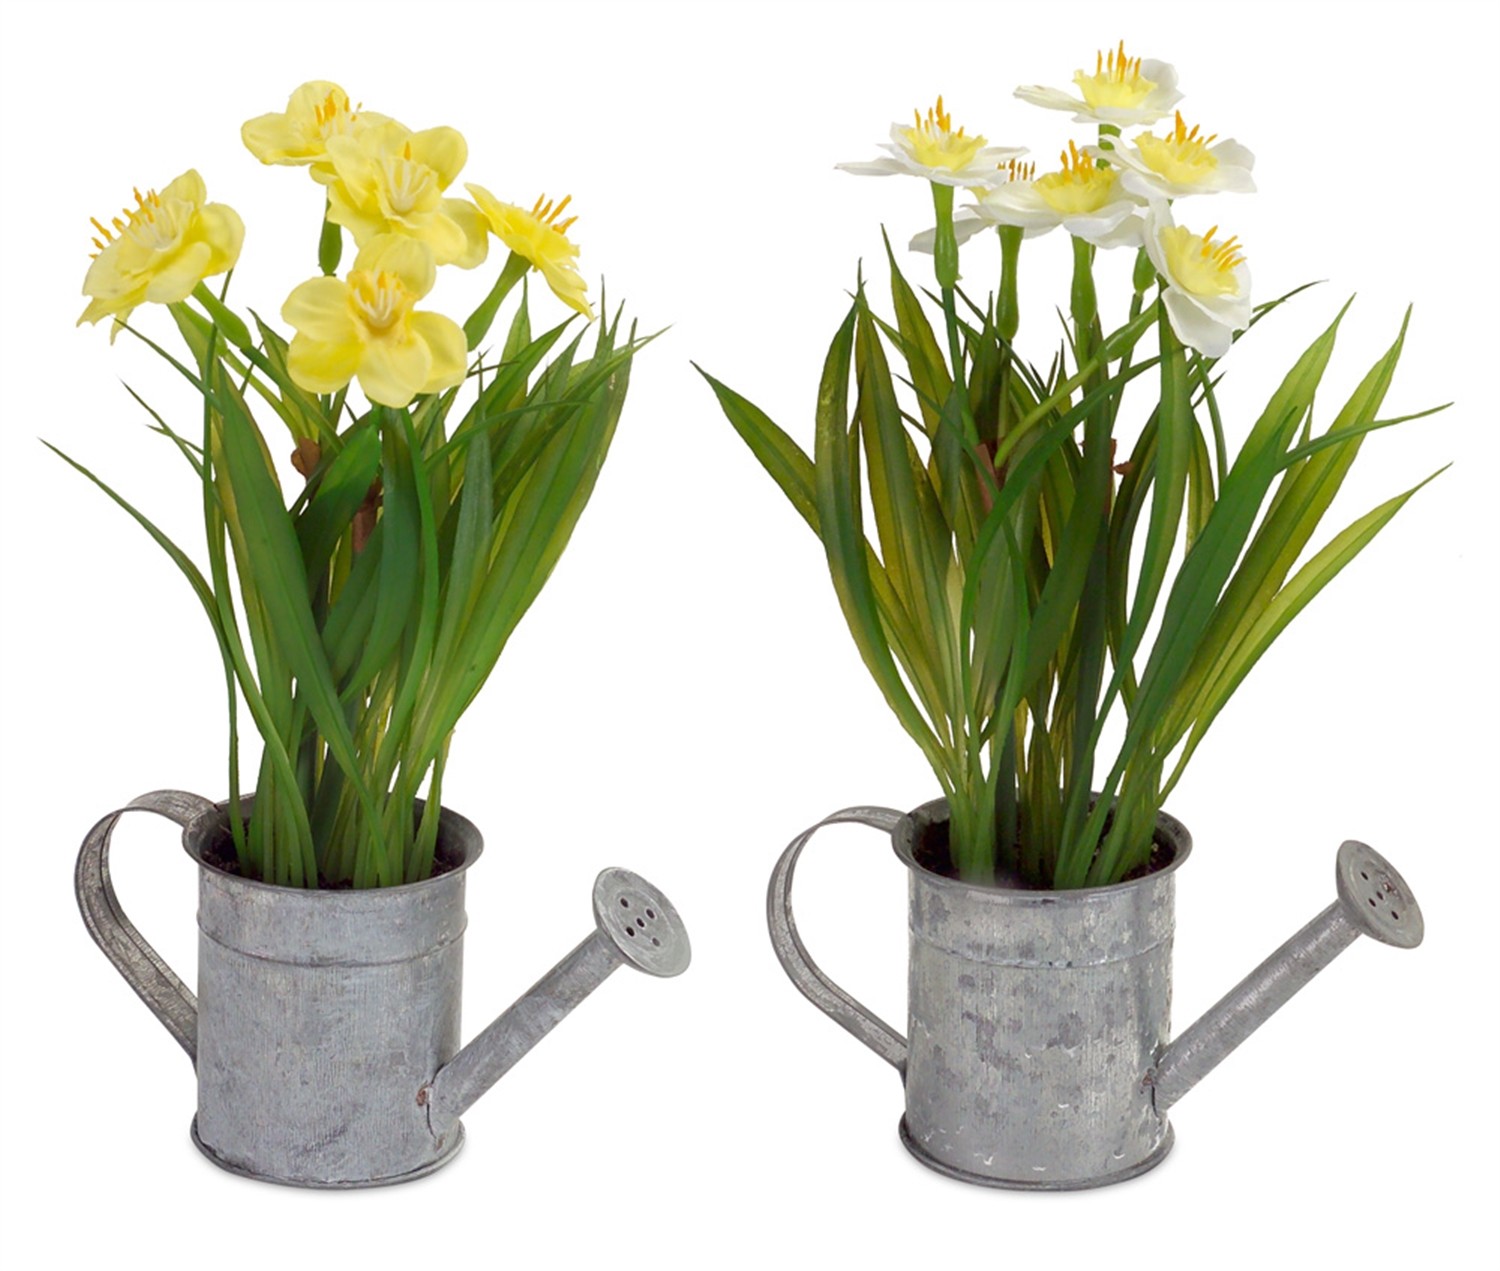 Daffodil in Watering Can (Set of 12) 9"H Metal/Plastic